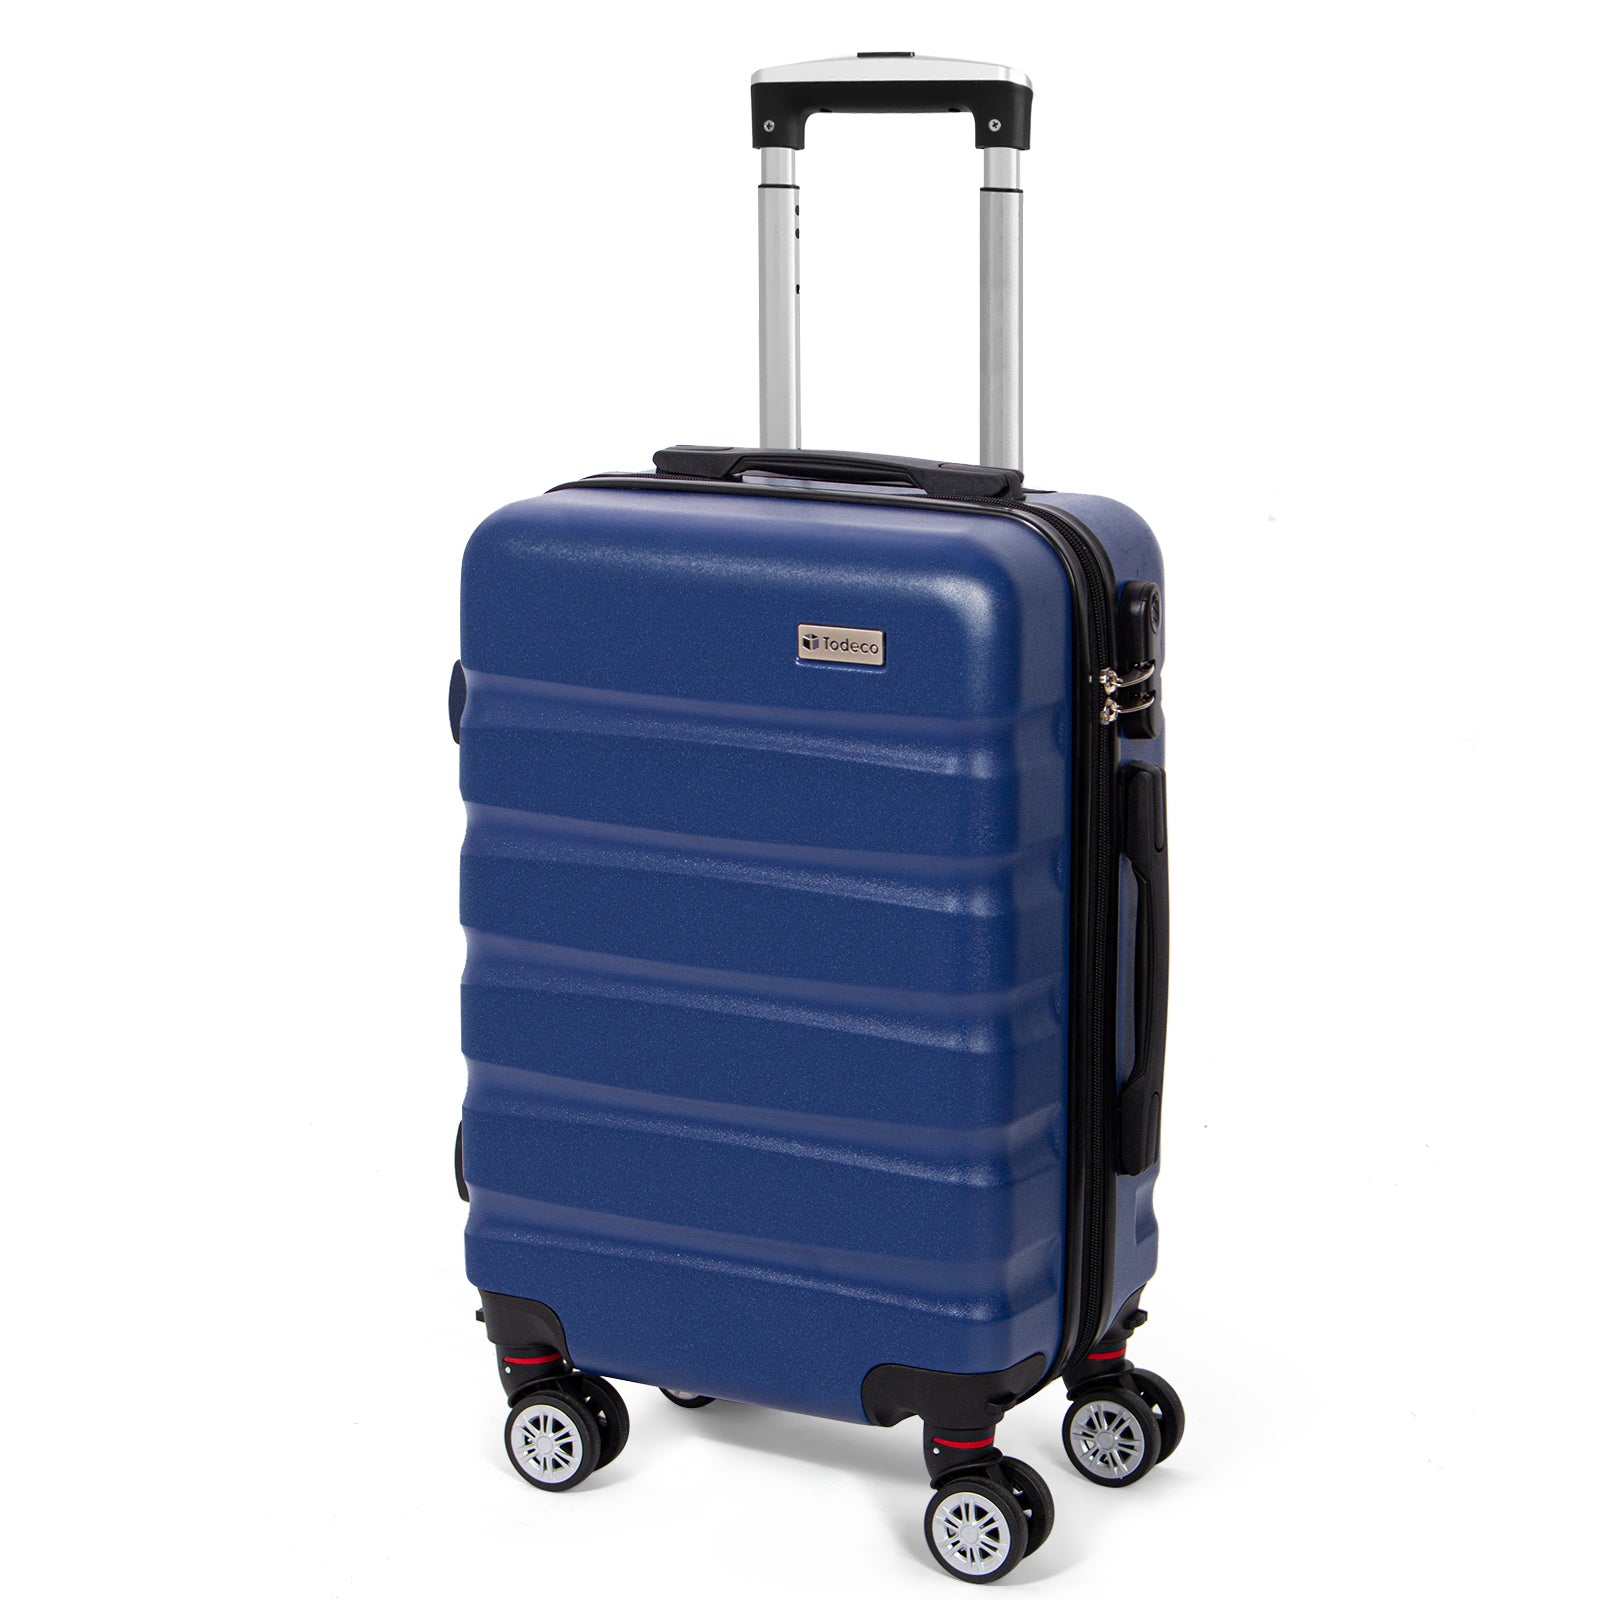 Todeco-Cabin-Suitcase-56cm-Rigid-and-Lightweight-ABS-PC-Lightweight-Carry-on-Suitcase-with-Hard-Shell-Travel-Suitcase-with-4-Double-Wheels-56x36x22cm-Dark-Blue